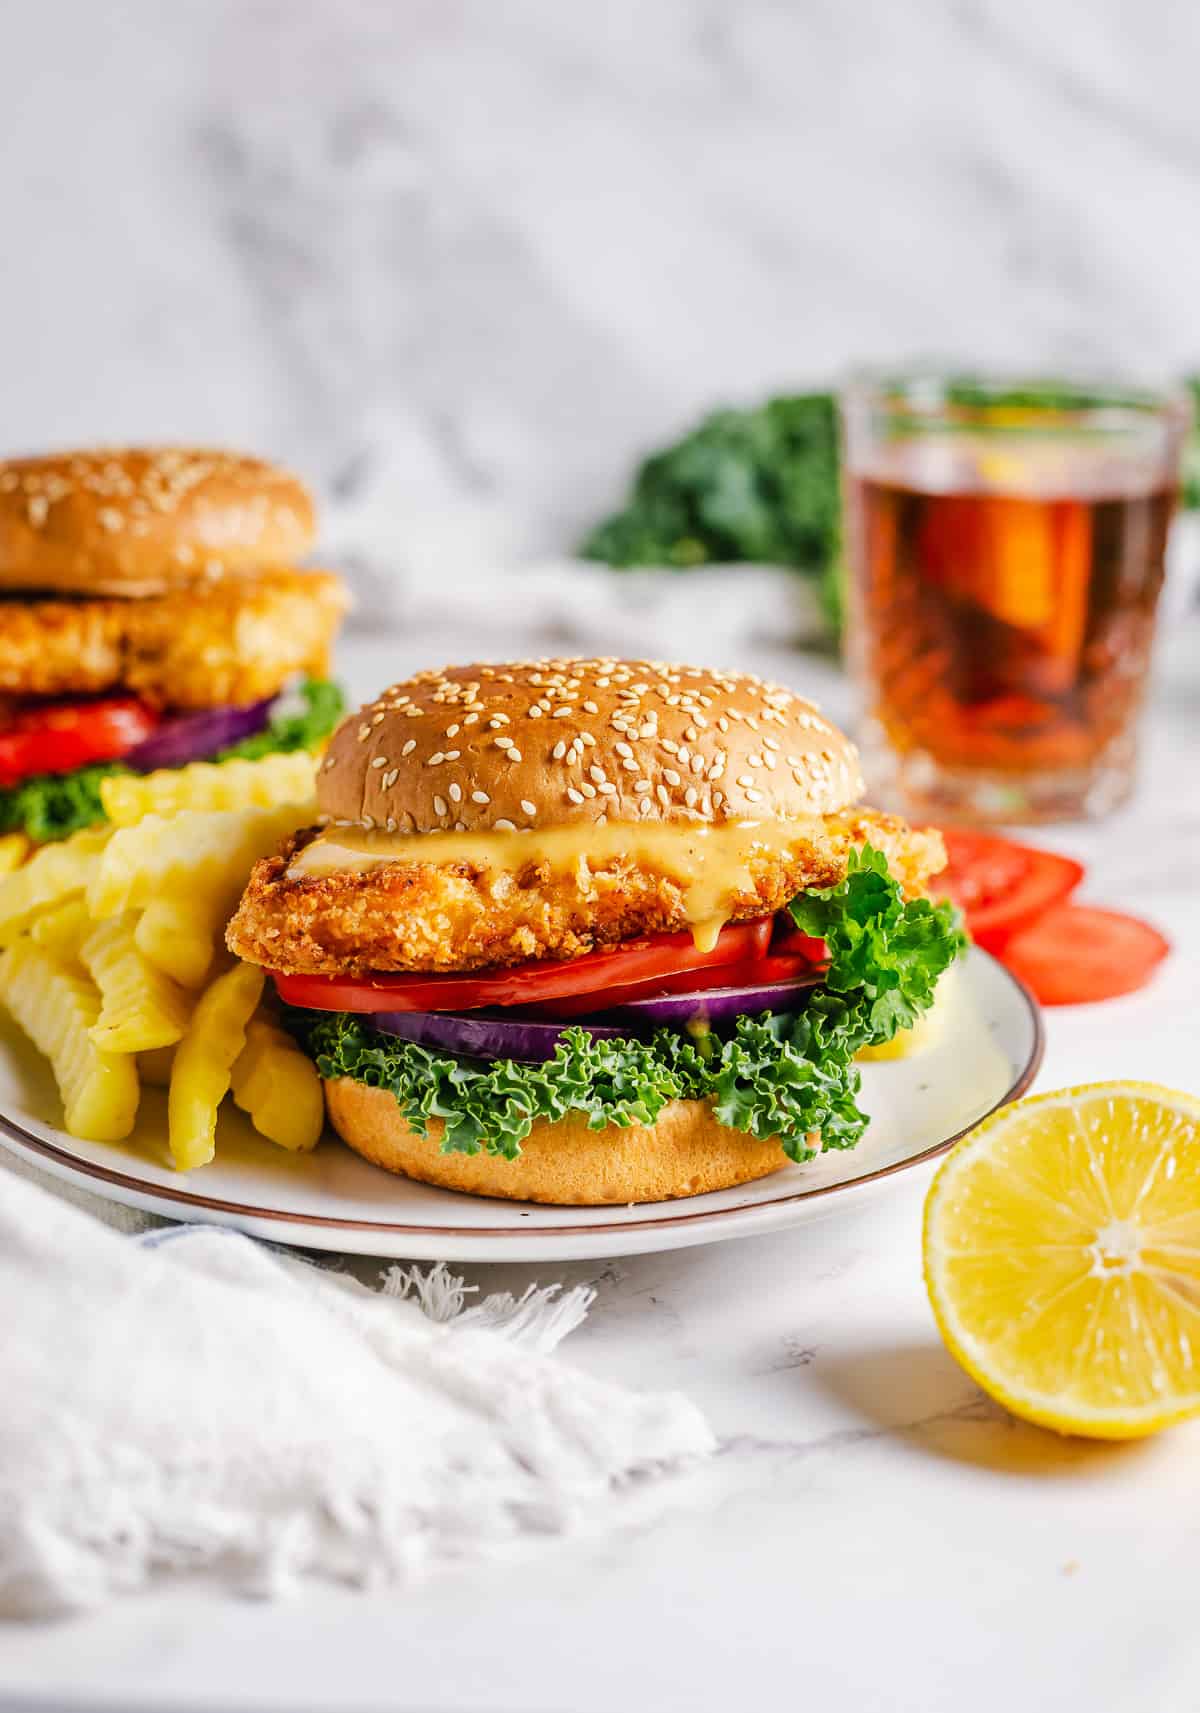 A crispy chicken sandwich on a plate with fries next to a lemon  half.